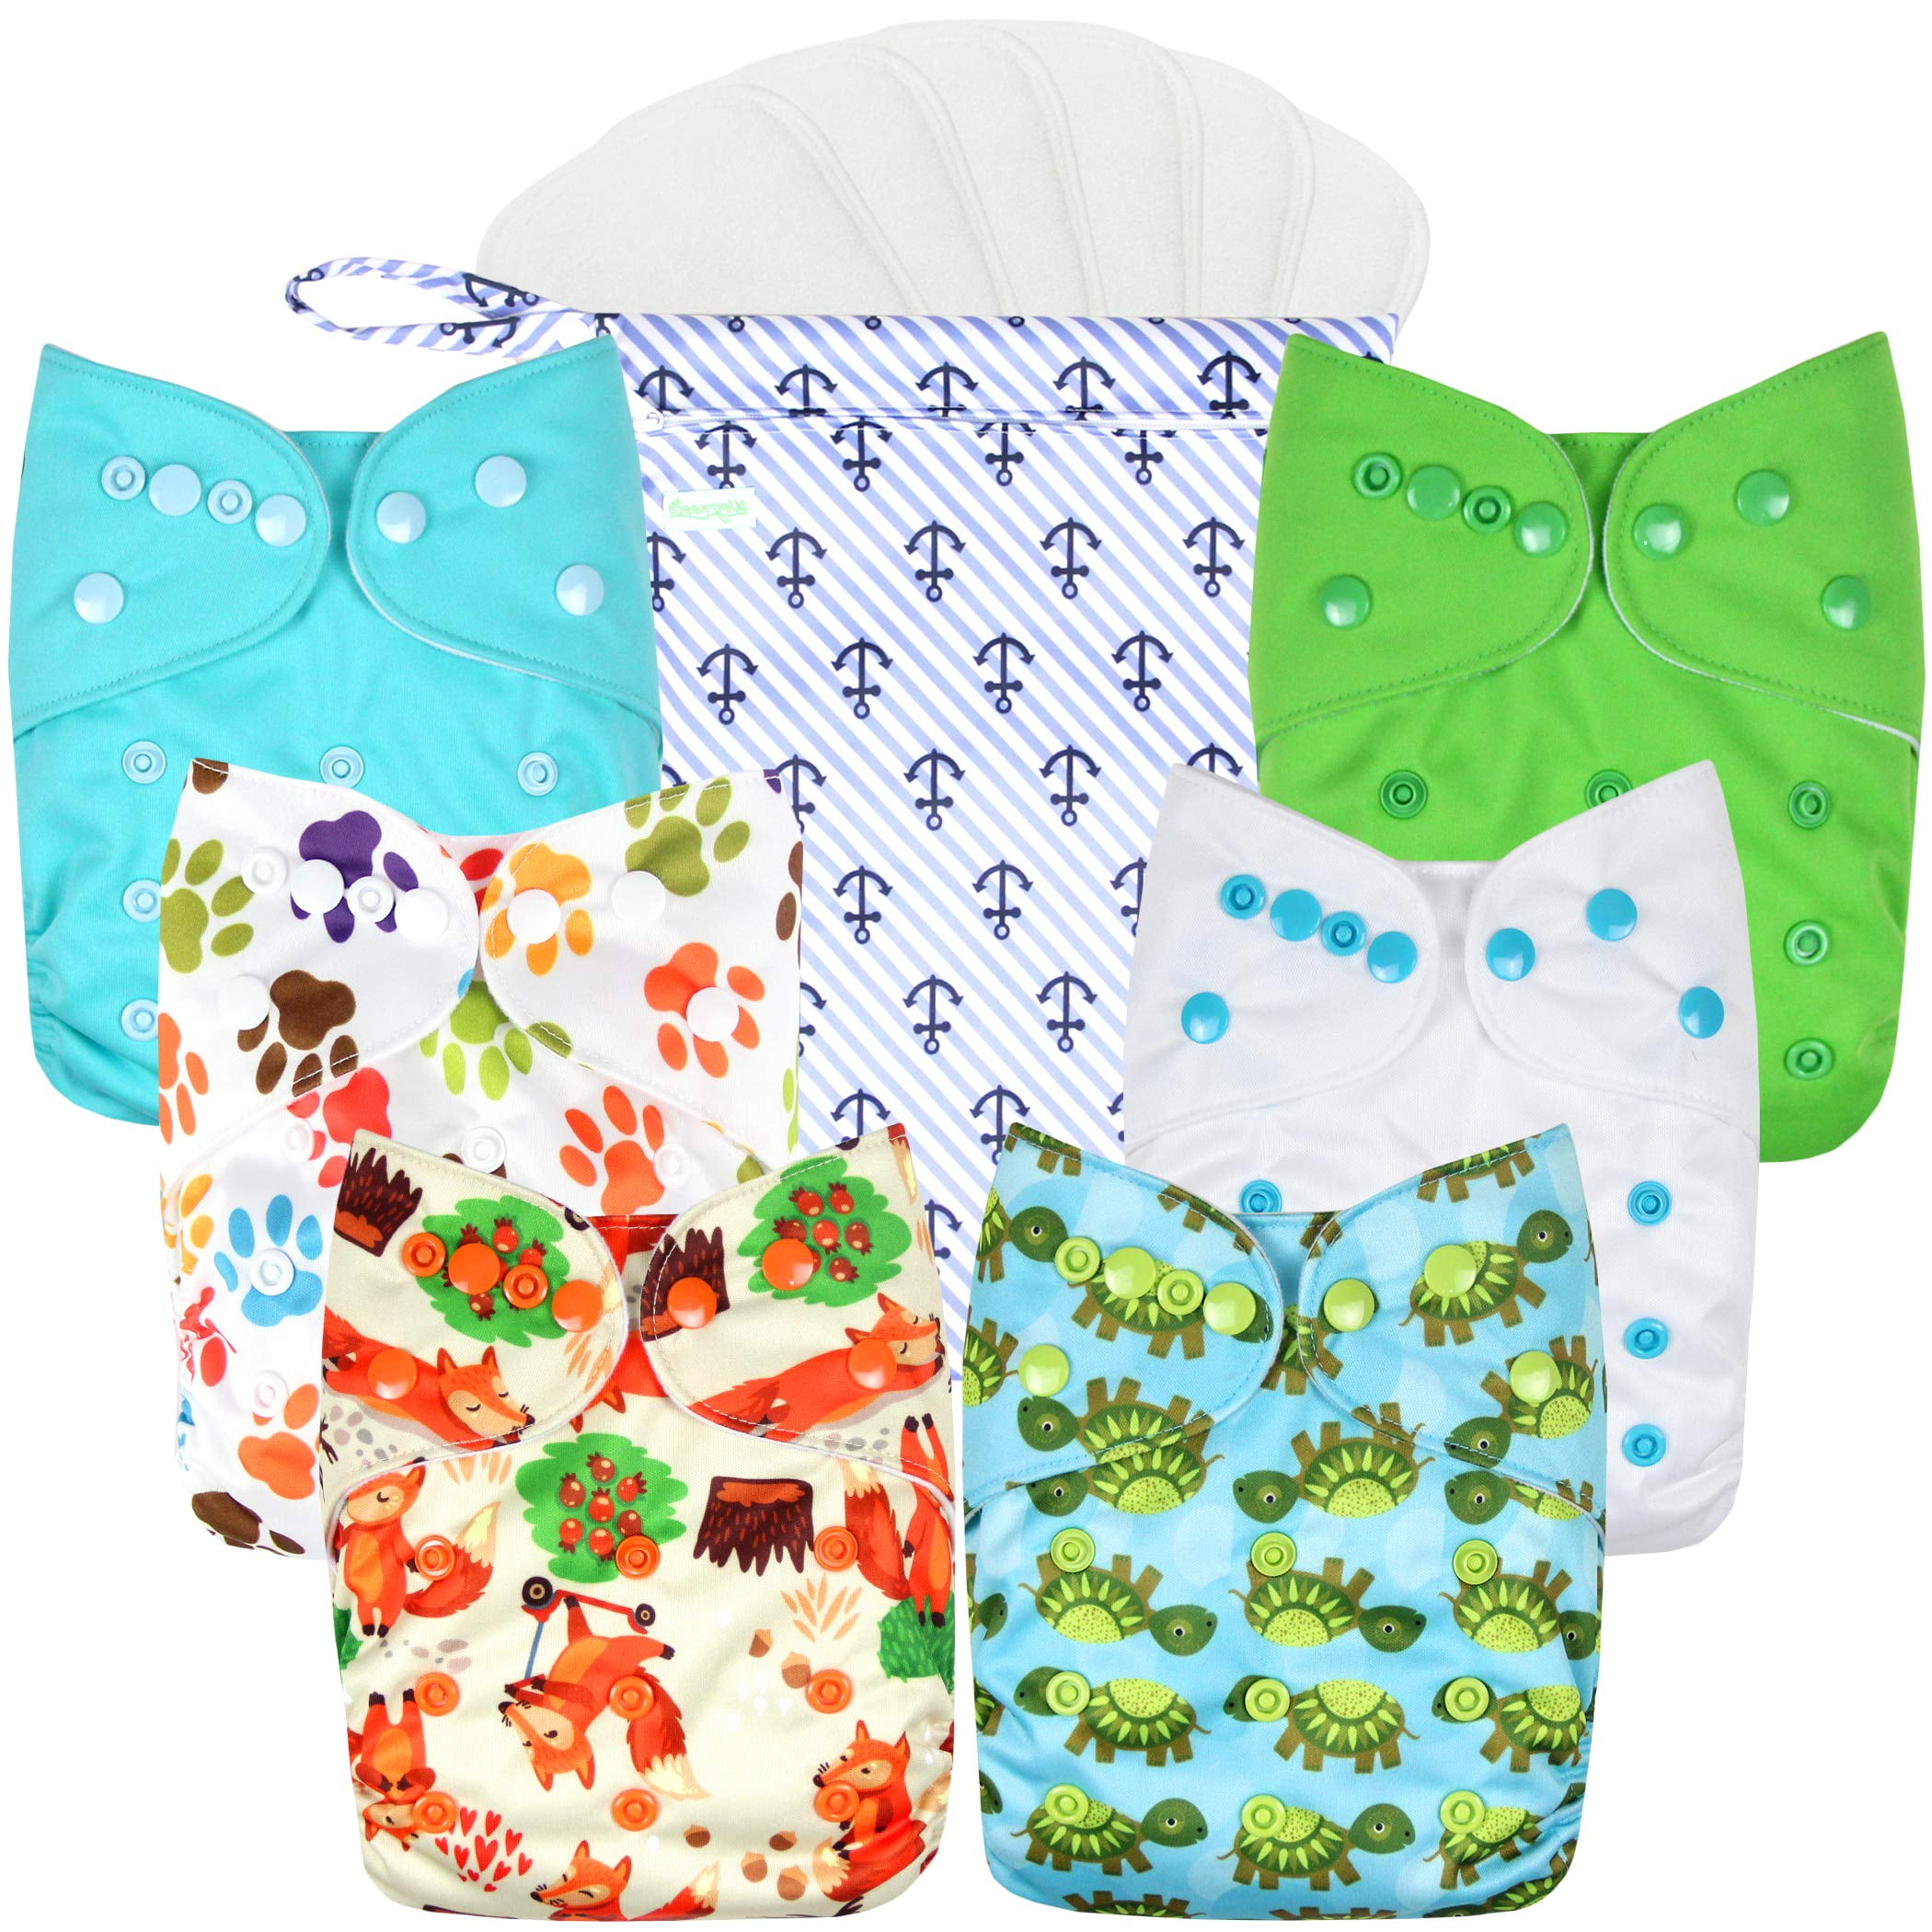 Wegreeco Washable Reusable Baby Cloth Pocket Diapers 6 Pack 6 Bamboo Inserts with 1 Wet Bag, Car, Airplane 